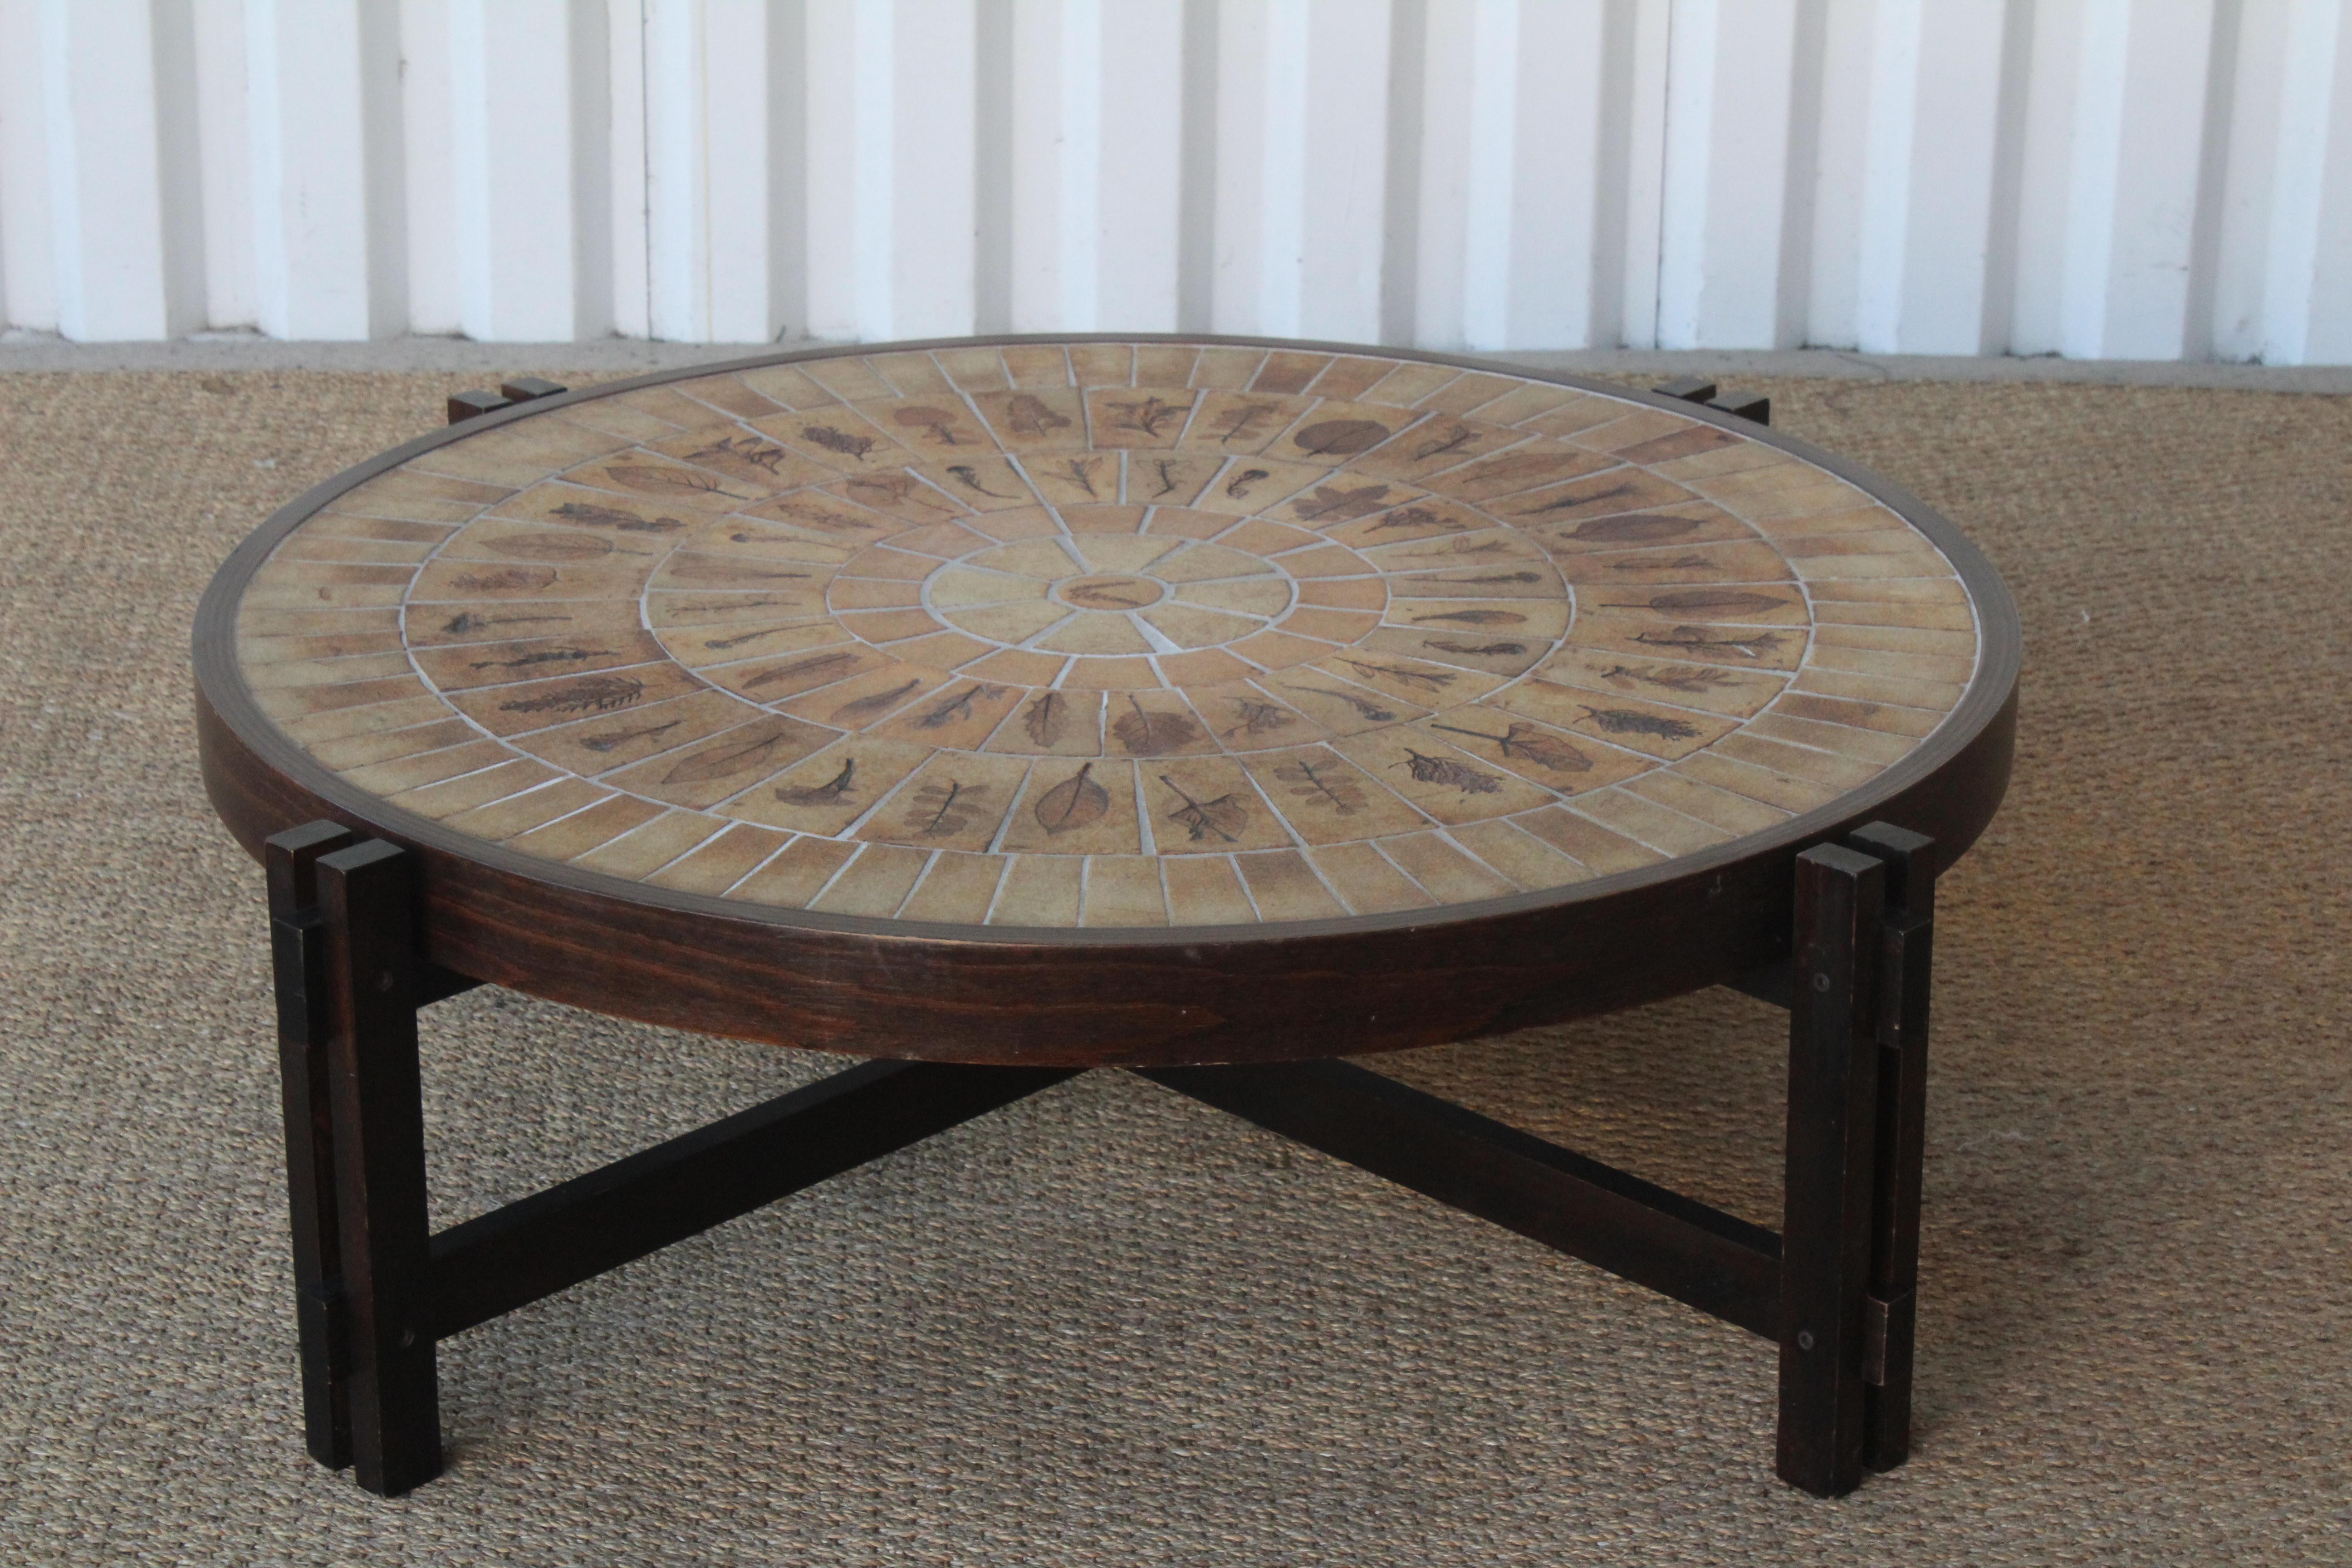 Vintage tile topped coffee table on wooden base by Roger Capron, France, 1960s. In over all good condition, wood base shows minor signs of wear.